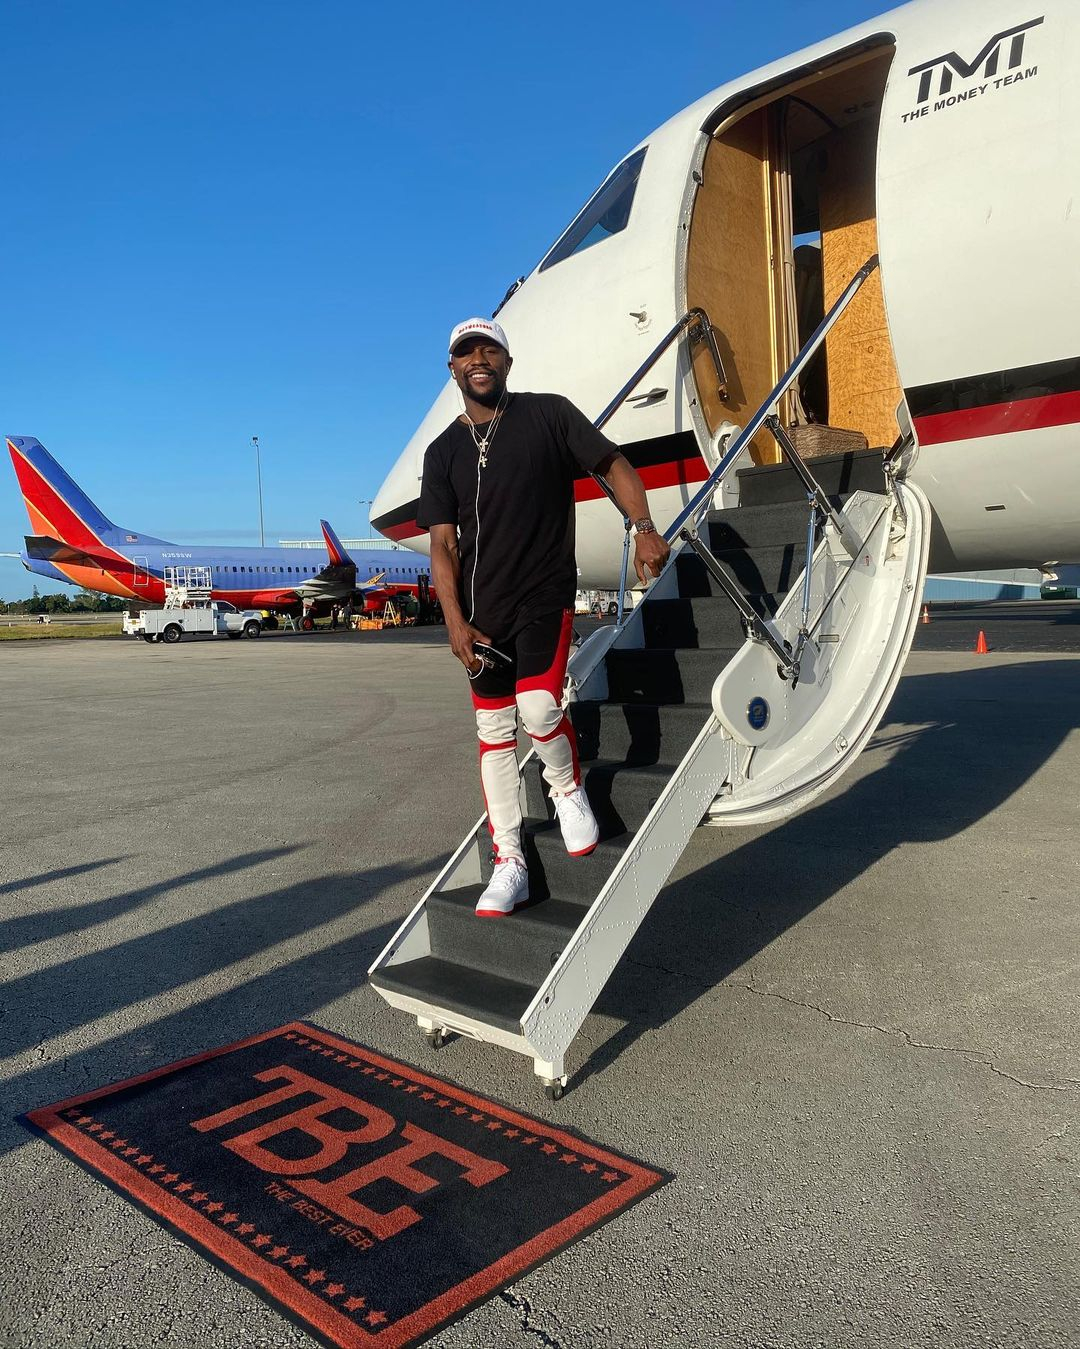 Floyd Mayweather's custom private jet worth $50 million with his name on it, masseuse, TVs and luxury seats.